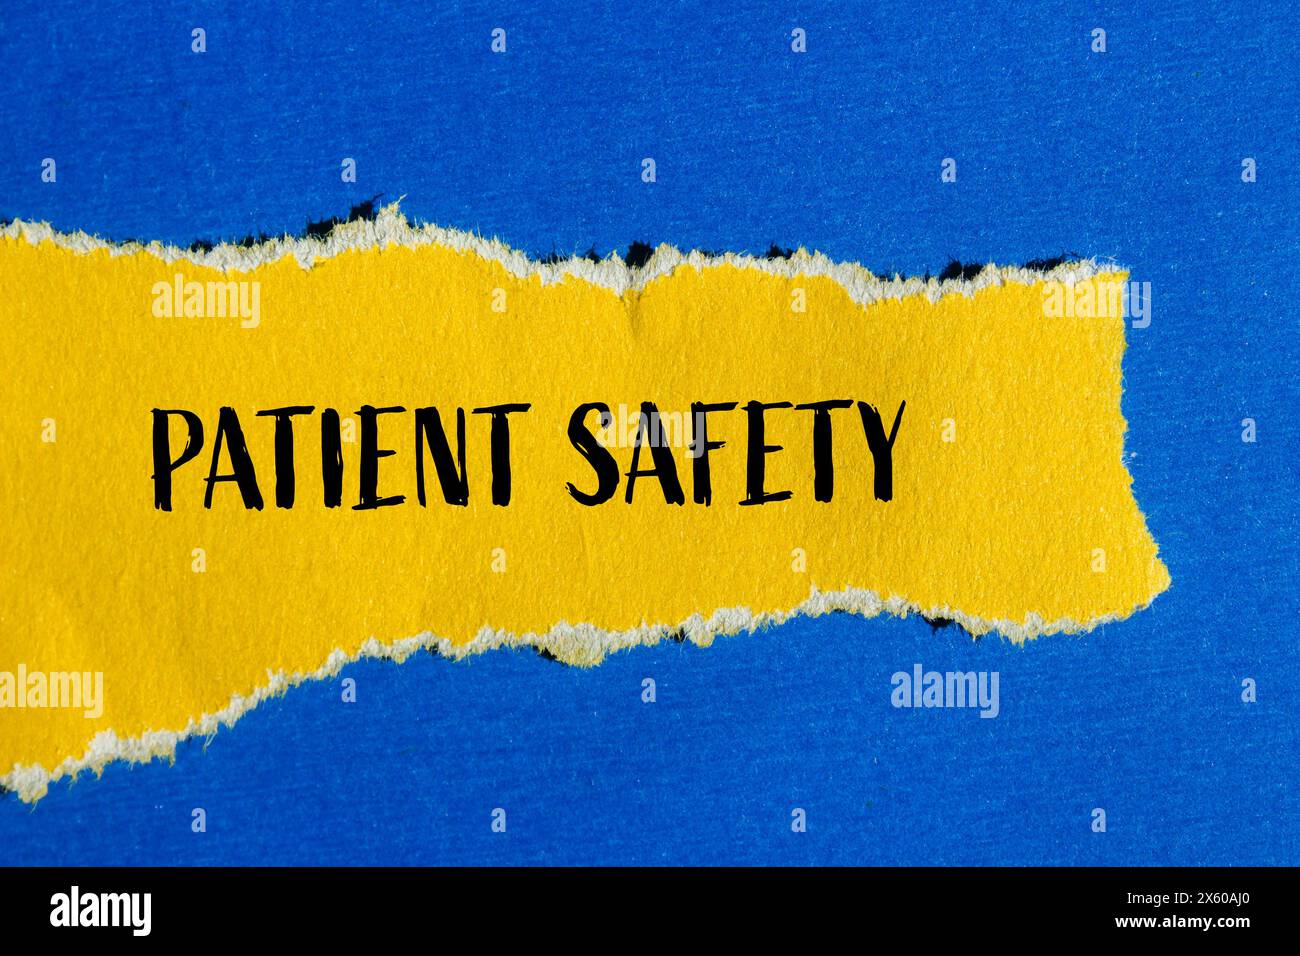 Patient safety words written on ripped yellow paper with blue background. Conceptual patient safety symbol. Copy space. Stock Photo